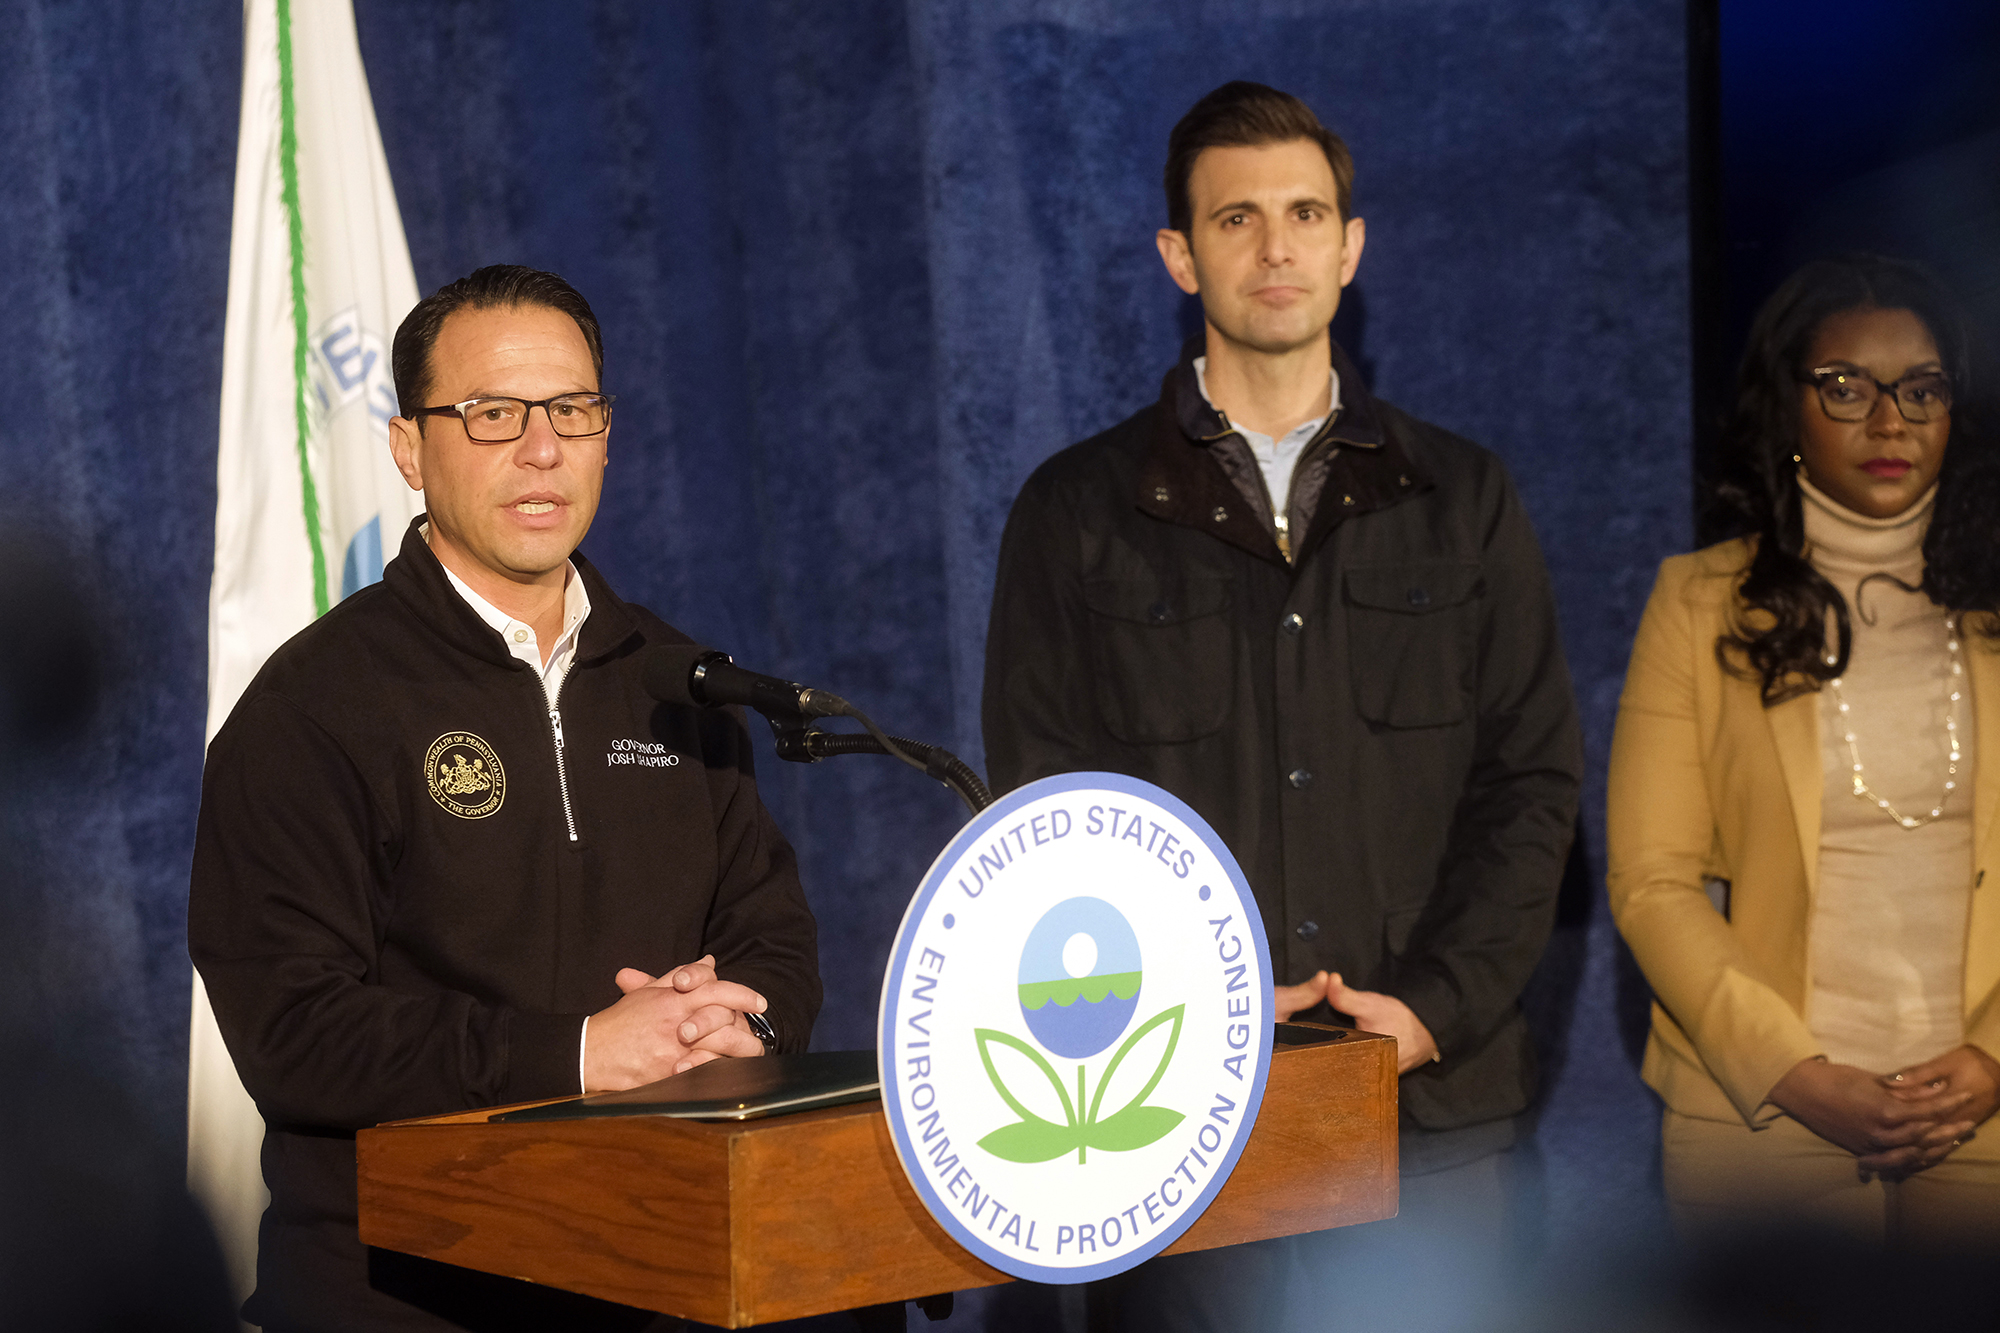 Josh Shapiro, governor of Pennsylvania, left, speaks during a news conference in East Palestine, Ohio, US, on Tuesday, February 21. 